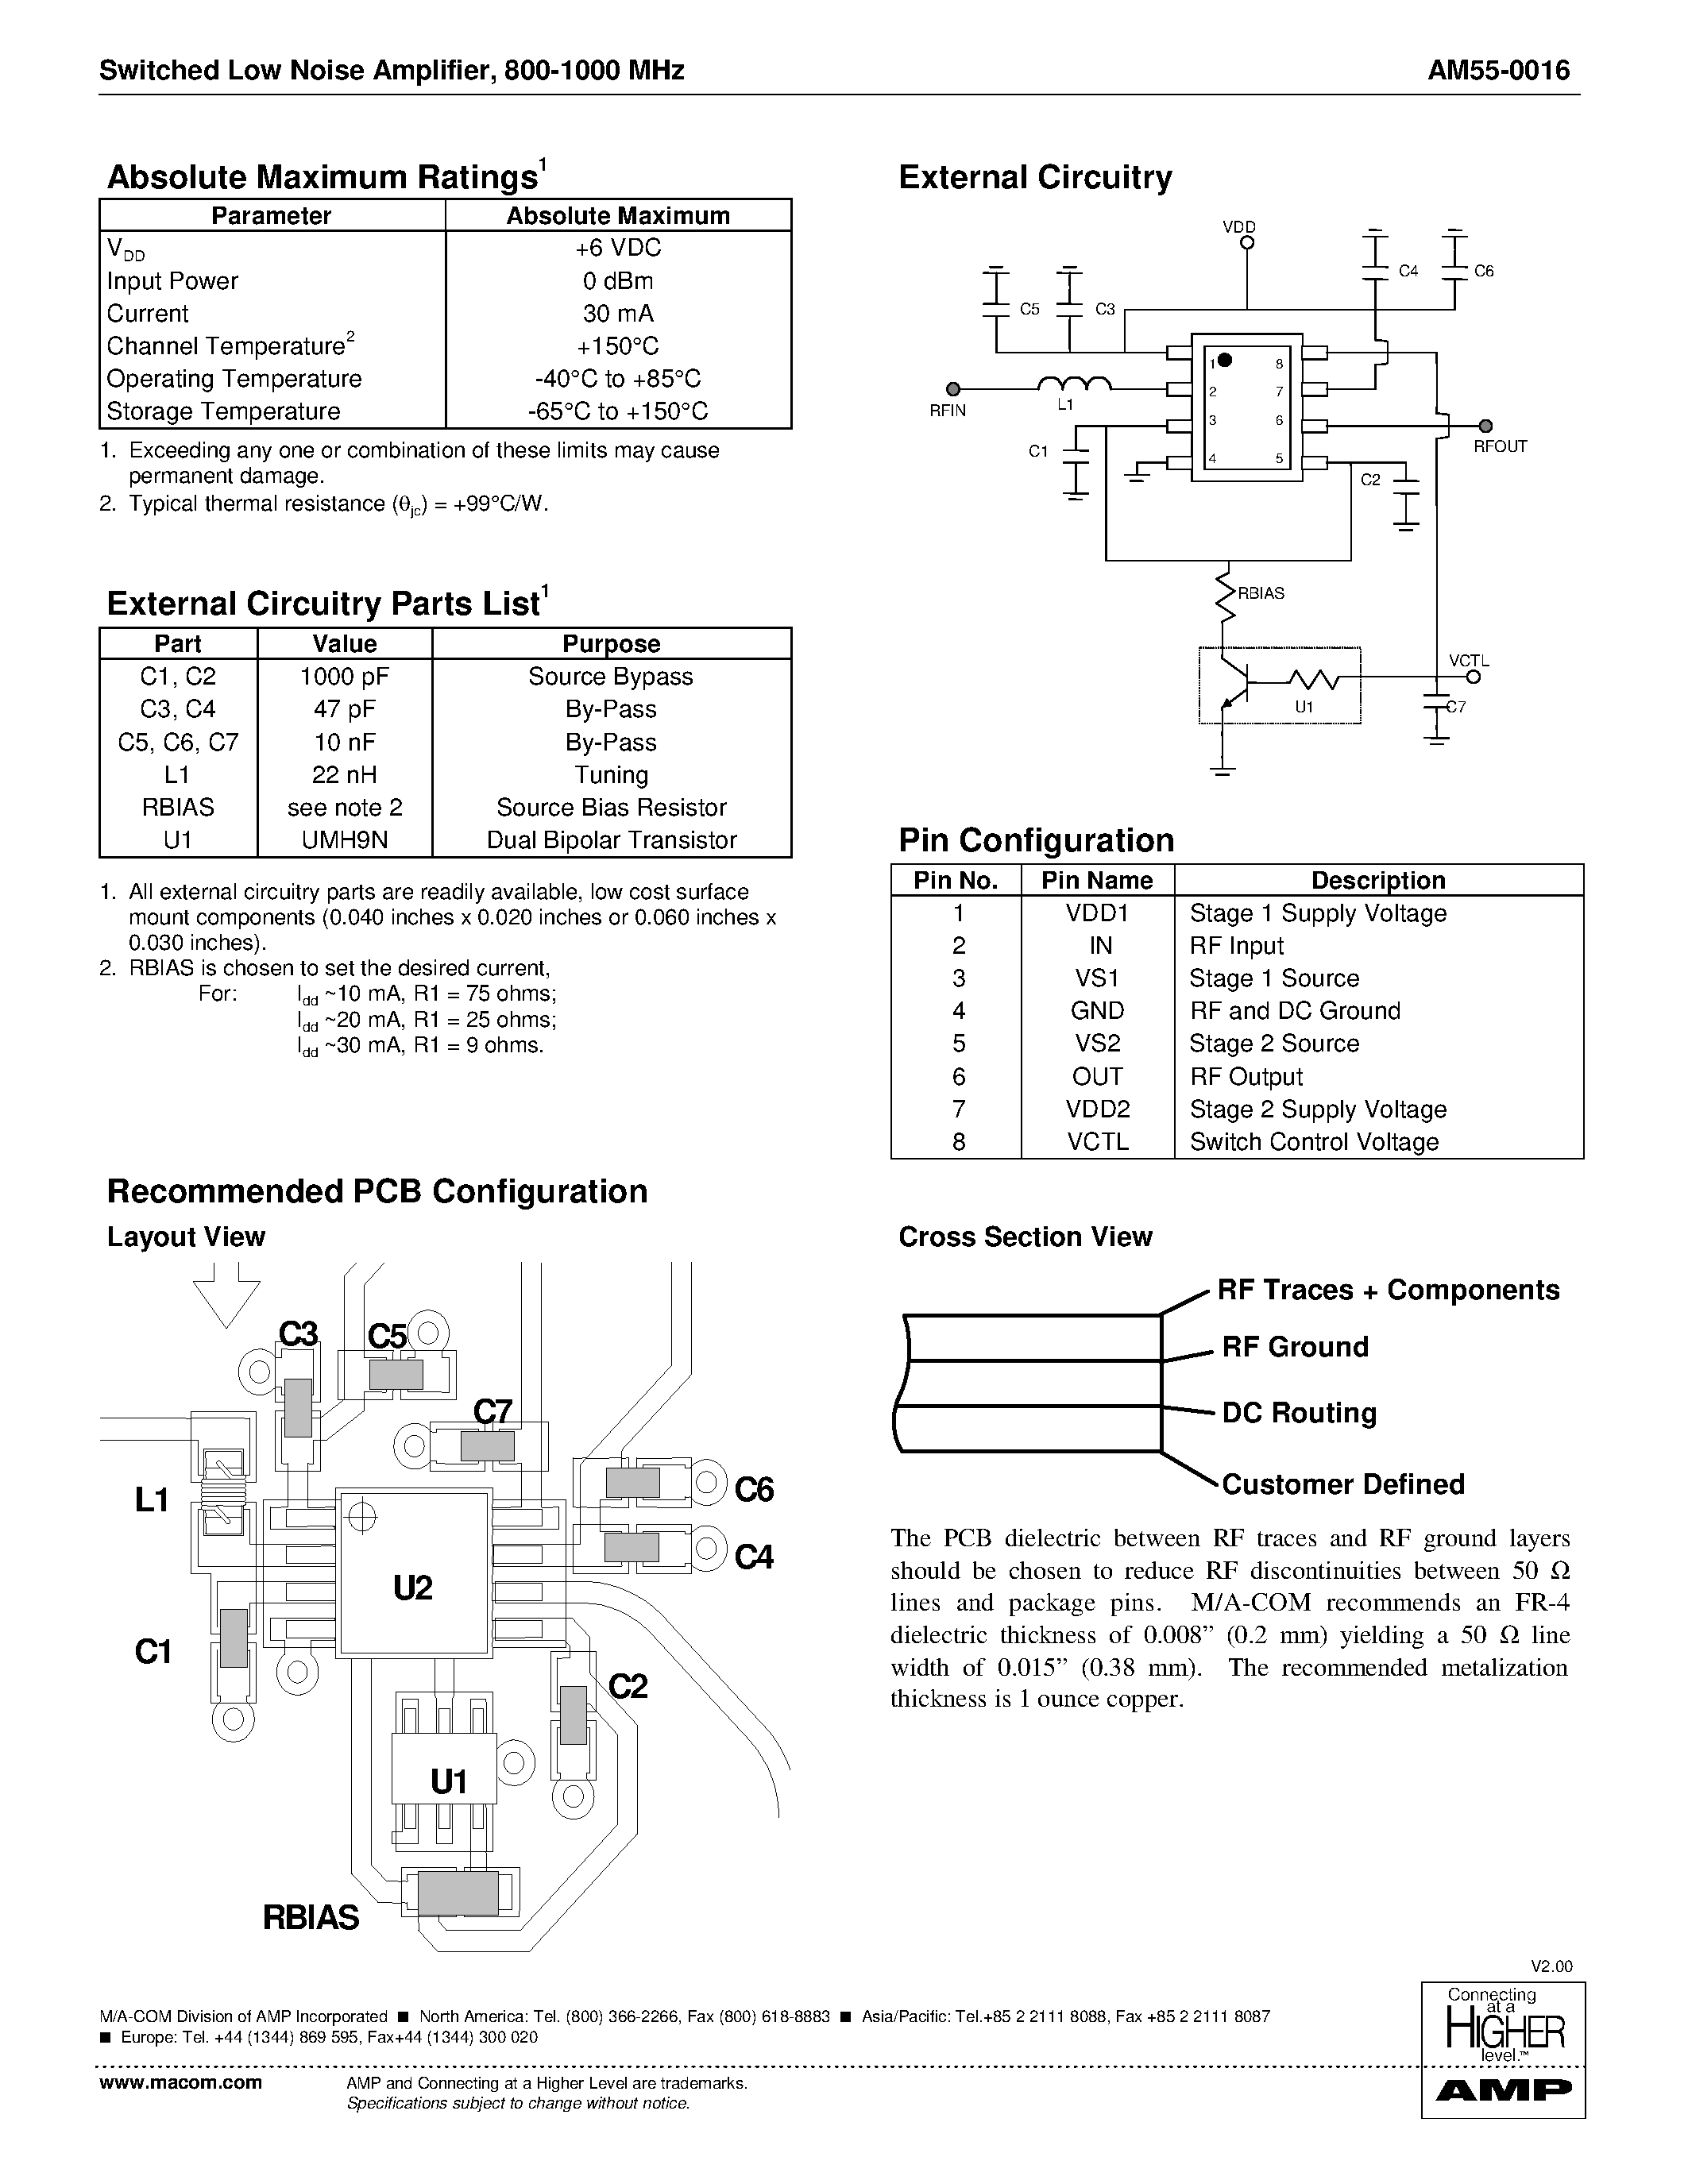 Datasheet AM55-0016TR - Switched Low Noise Amplifier 800 - 1000 MHz page 2